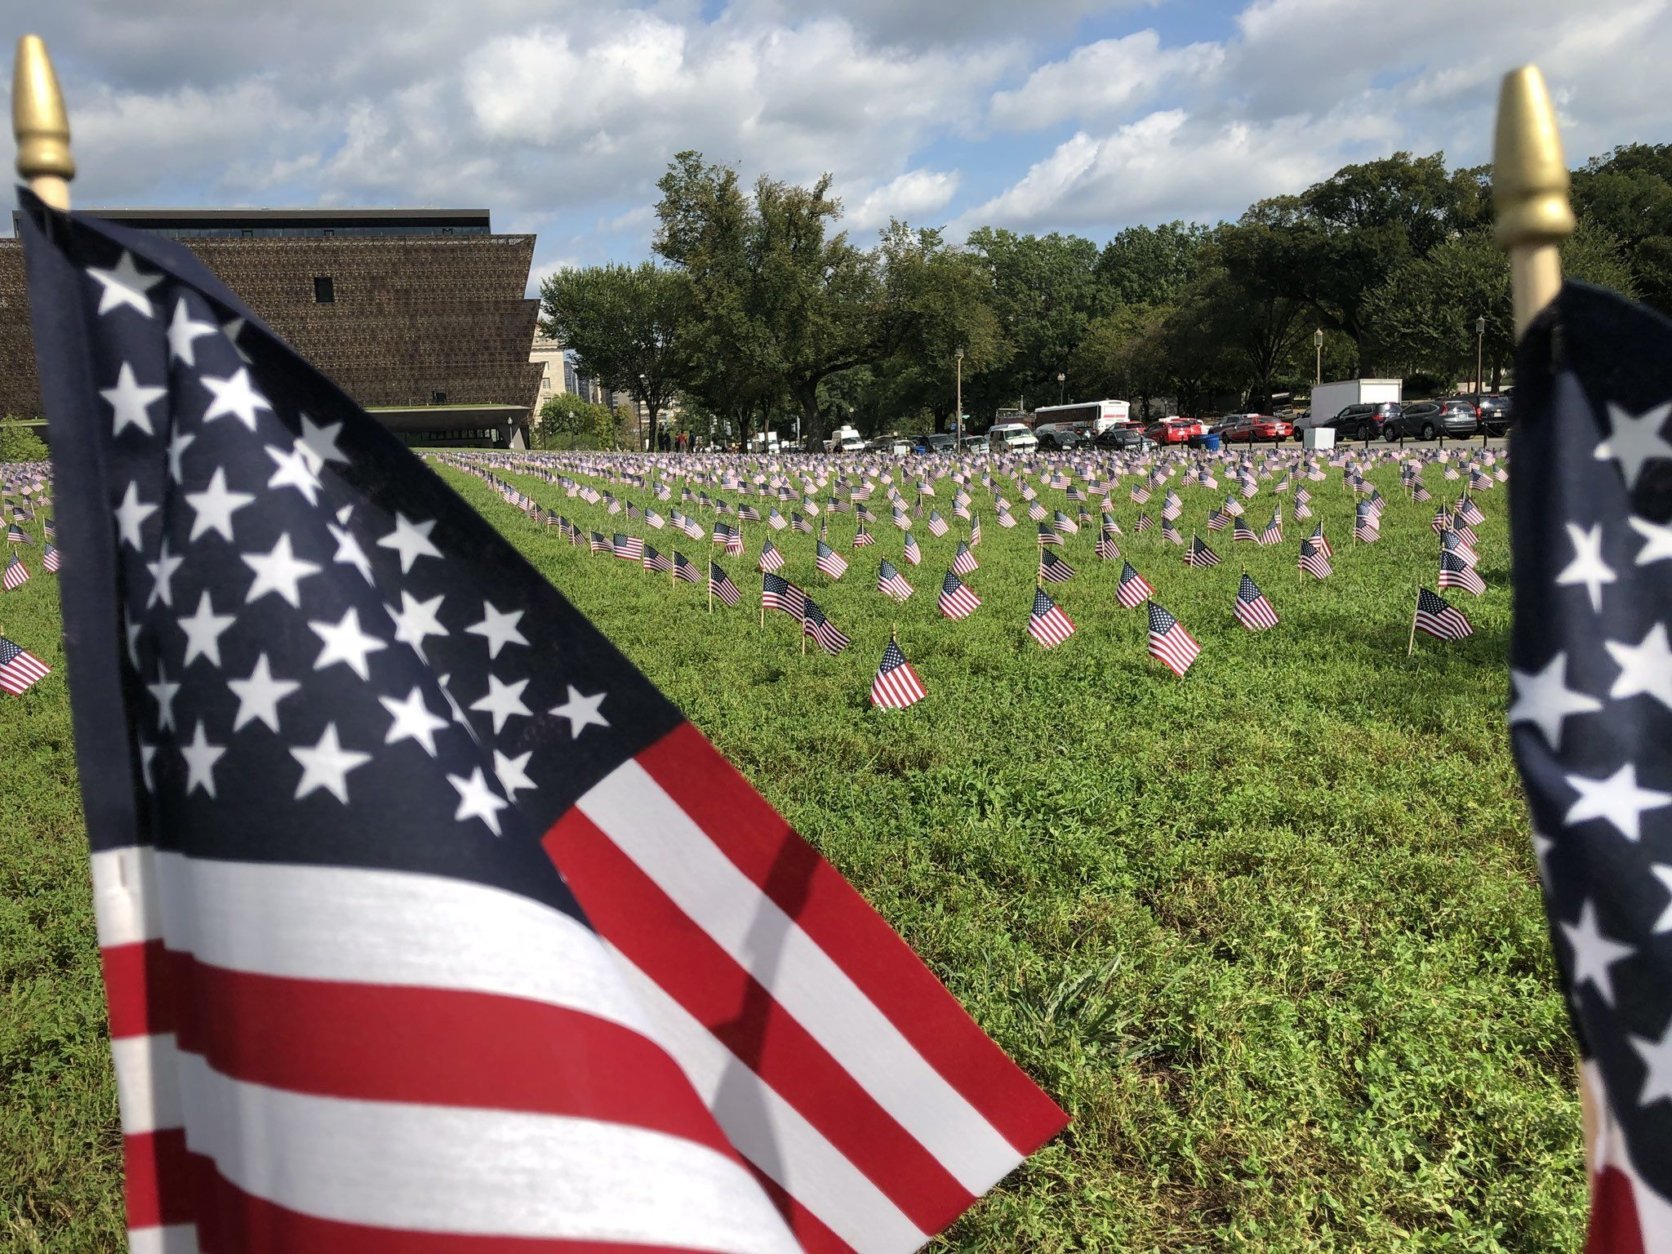 In all, 5,520 postcard-size flags were planted on a patch of grass between the Washington Monument and 15th Street to represent veteran suicides occurring in 2018 through Wednesday. (WTOP/Kristi King)